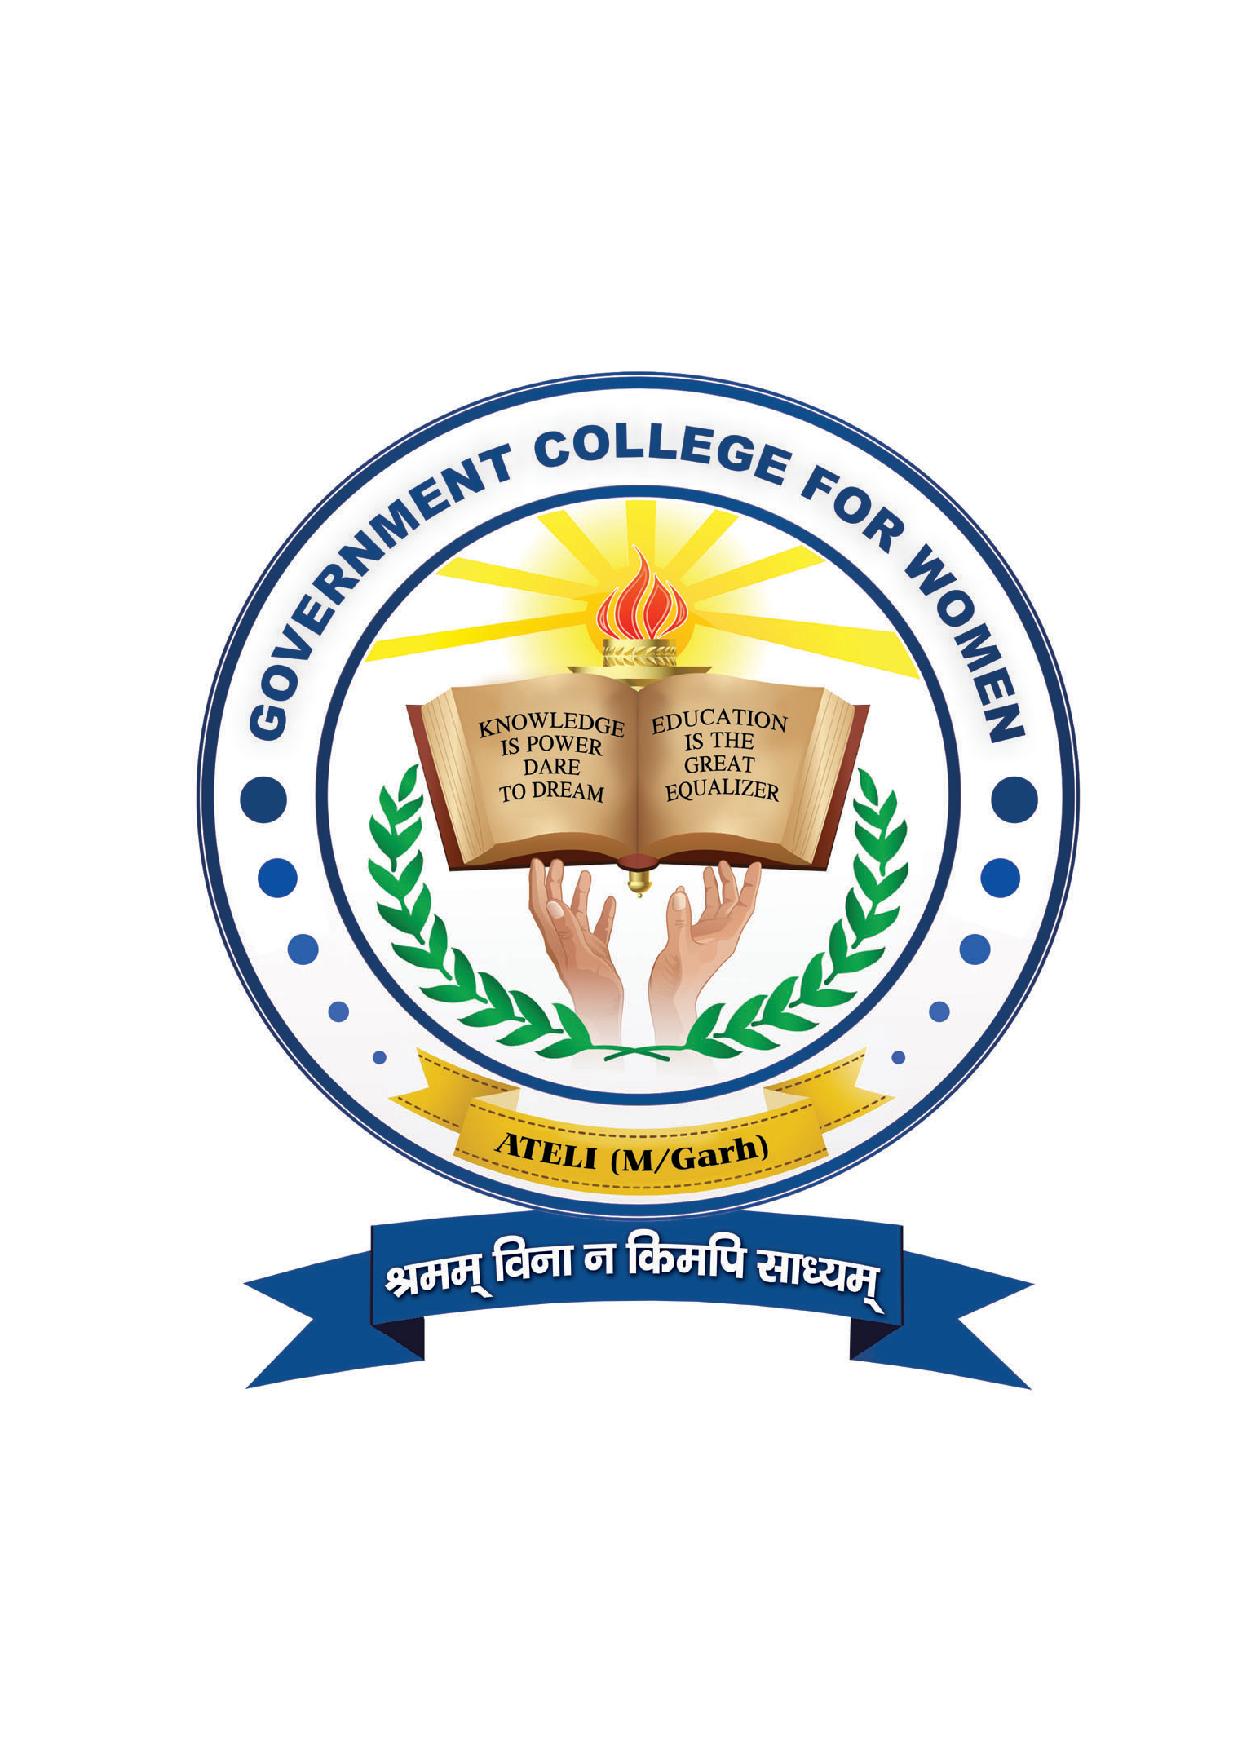 Government College for women - Logo